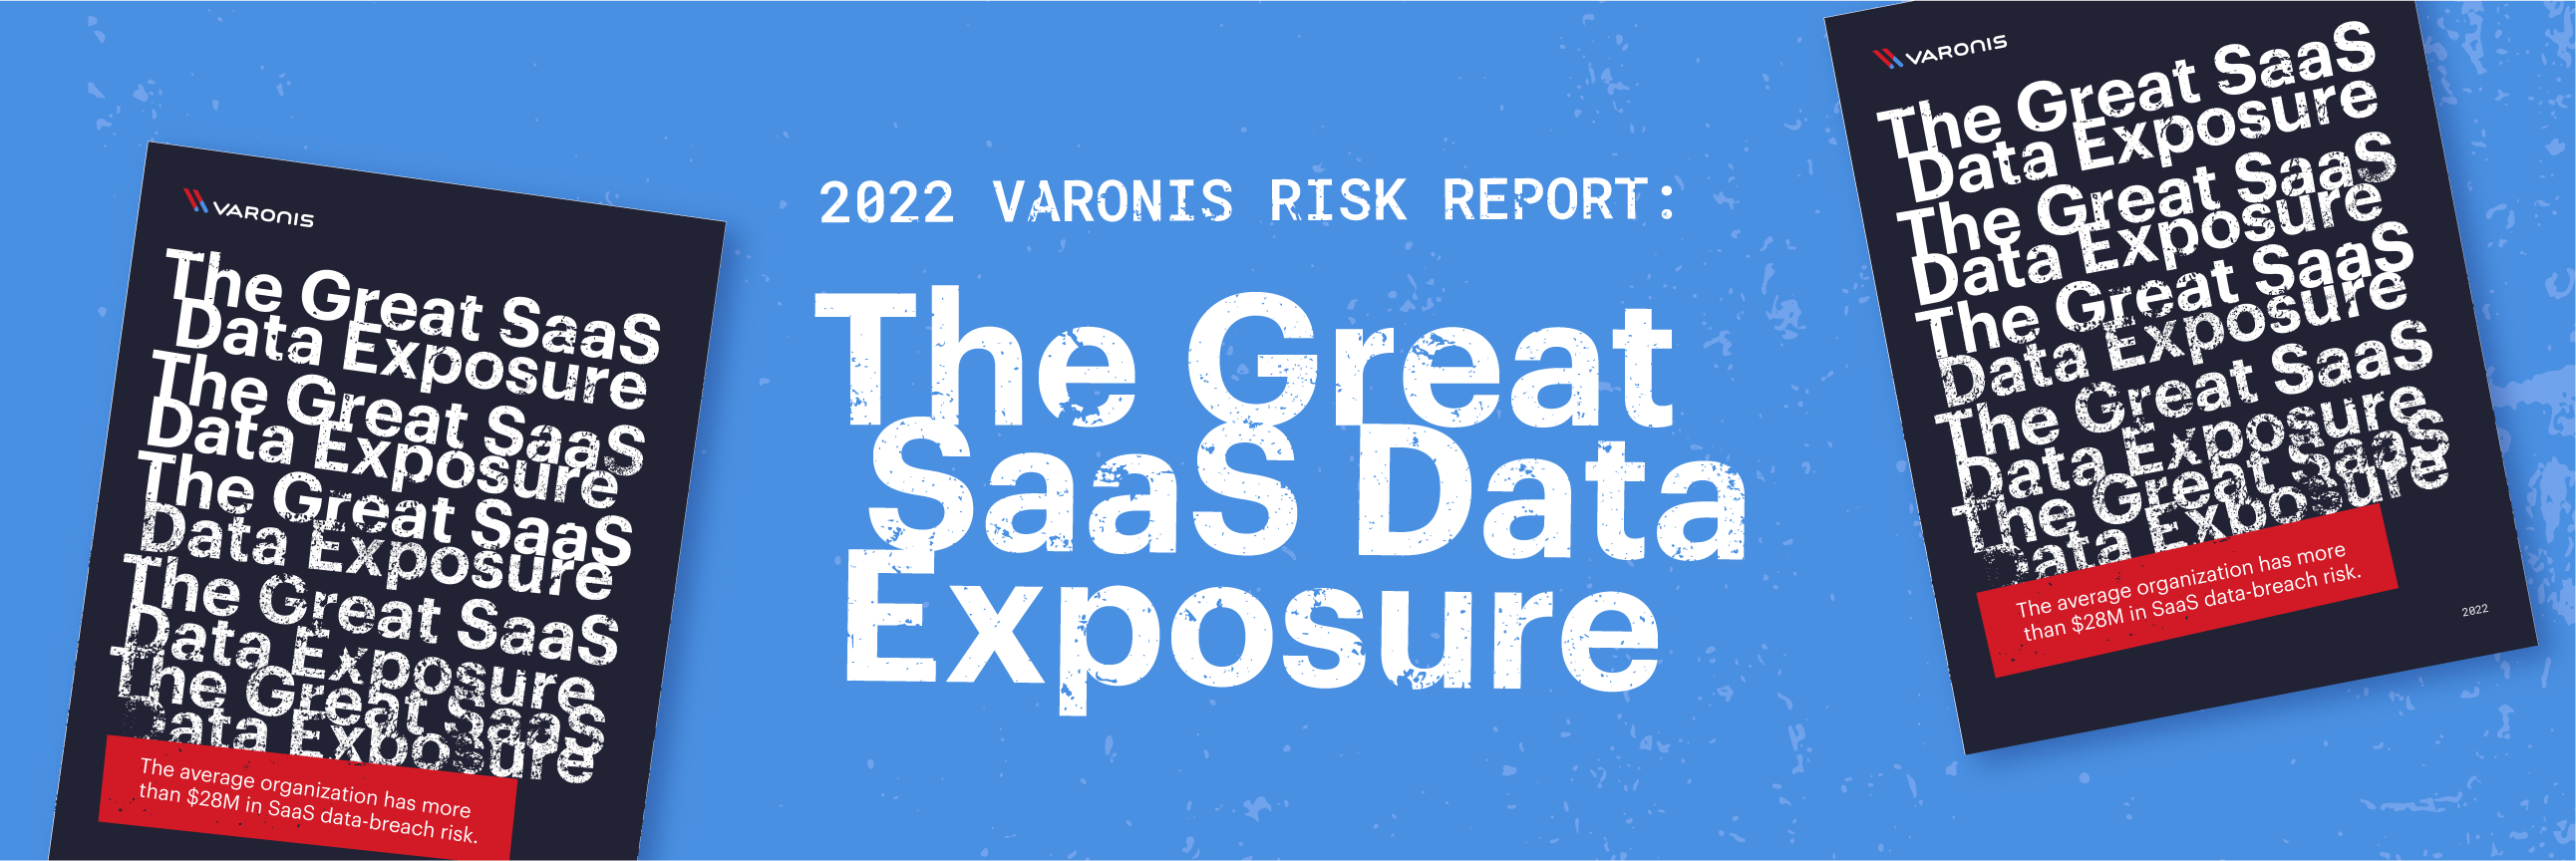 saas-risk-report-reveals-exposed-cloud-data-is-a-$28m-risk-for-typical-company